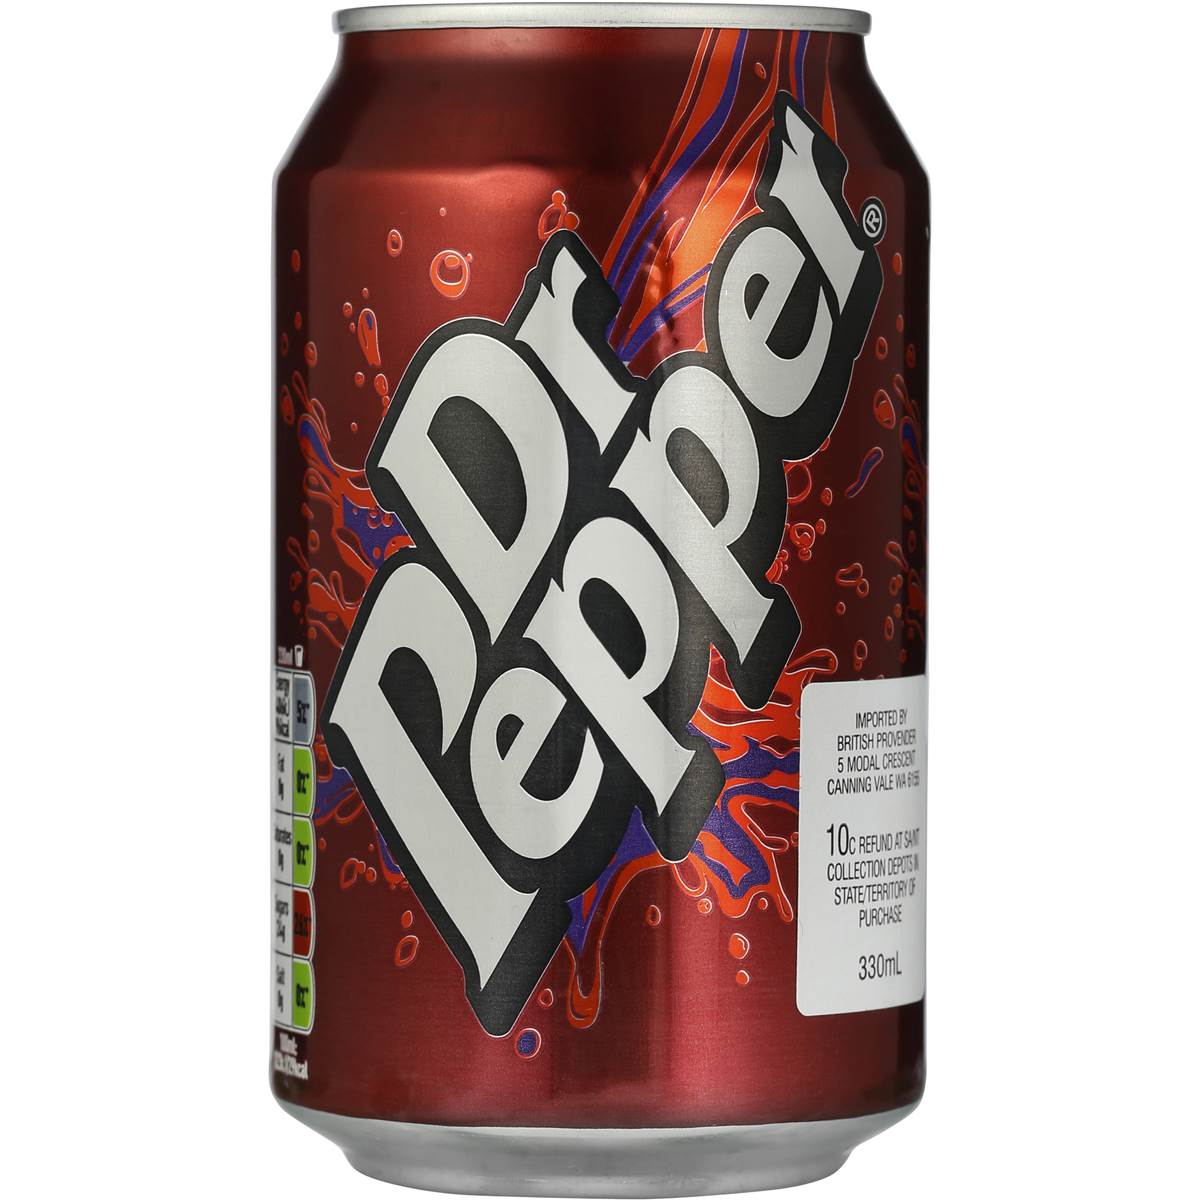 So You’re a Trivia Expert? Prove It by Answering All 22 of These True/False Questions Correctly Dr. Pepper